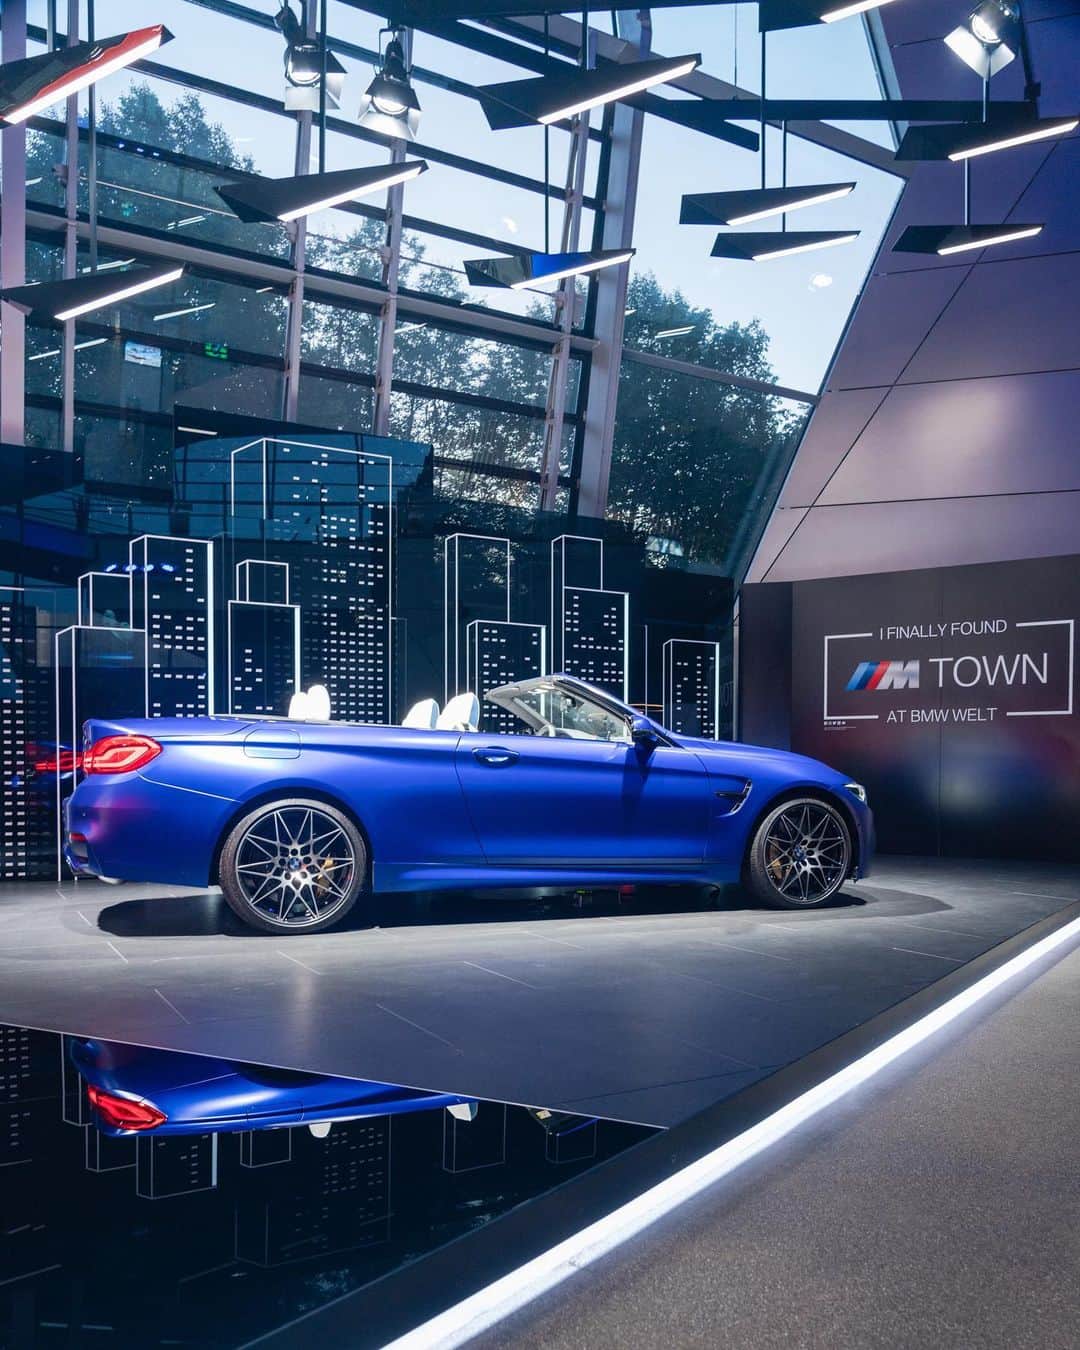 BMWさんのインスタグラム写真 - (BMWInstagram)「The virtual dream city of M Town came to life at BMW Welt. Who's moving in?  #TheX3M #TheX4M #BMW #BMWM #M_Town @bmwwelt __ BMW M5 Competition: Fuel consumption in l/100 km (combined): 10.6. CO2 emissions in g/km (combined): 241.  BMW M4 Convertible: Fuel consumption in l/100 km (combined): 10.2 [9.5]. CO2 emissions in g/km (combined): 232 [217]. BMW X3 M Competition: Fuel consumption in l/100 km (combined): 10.5. CO2 emissions in g/km (combined): 239.  BMW X4 M Competition: Fuel consumption in l/100 km (combined): 10.5. CO2 emissions in g/km (combined): 239.  The values of fuel consumptions, CO2 emissions and energy consumptions shown were determined according to the European Regulation (EC) 715/2007 in the version applicable at the time of type approval. The figures refer to a vehicle with basic configuration in Germany and the range shown considers optional equipment and the different size of wheels and tires available on the selected model. The values of the vehicles are already based on the new WLTP regulation and are translated back into NEDC-equivalent values in order to ensure the comparison between the vehicles. [With respect to these vehicles, for vehicle related taxes or other duties based (at least inter alia) on CO2-emissions the CO2 values may differ to the values stated here.] The CO2 efficiency specifications are determined according to Directive 1999/94/EC and the European Regulation in its current version applicable. The values shown are based on the fuel consumption, CO2 values and energy consumptions according to the NEDC cycle for the classification. Further information on official fuel consumption figures and specific CO2 emission values of new passenger cars is included in the following guideline: 'Leitfaden über den Kraftstoffverbrauch, die CO2-Emissionen und den Stromverbrauch neuer Personenkraftwagen' (Guide to the fuel economy, CO2 emissions and electric power consumption of new passenger cars), which can be obtained free of charge from all dealerships, from Deutsche Automobil Treuhand GmbH (DAT), Hellmuth-Hirth-Str. 1, 73760 Ostfildern-Scharnhausen and at https://www.dat.de/co2/.」8月30日 17時12分 - bmw